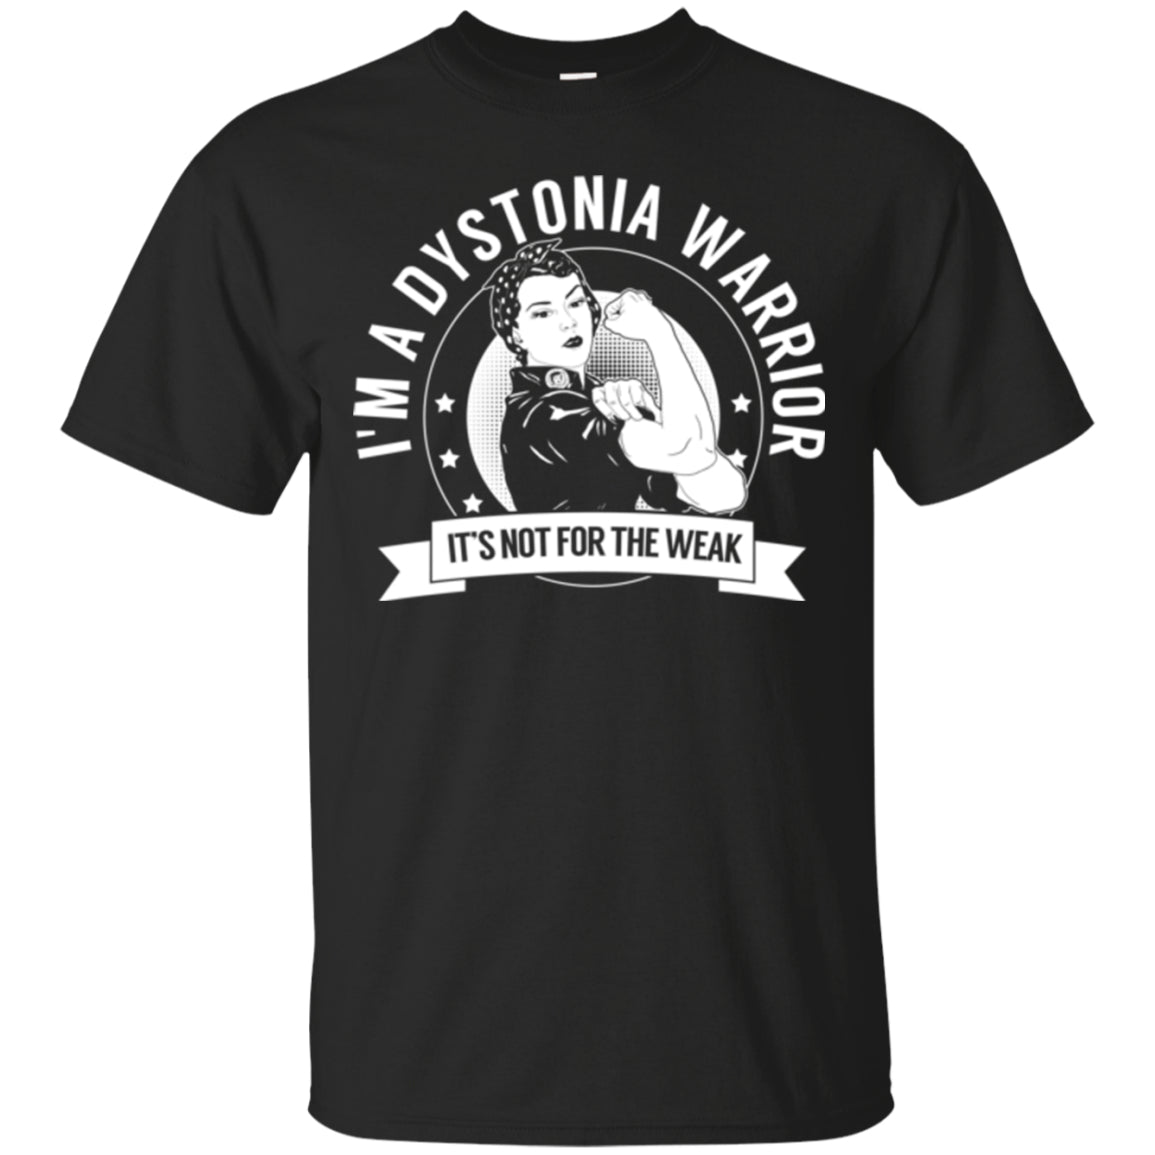 Dystonia Warrior Not For The Weak Unisex Shirt - The Unchargeables